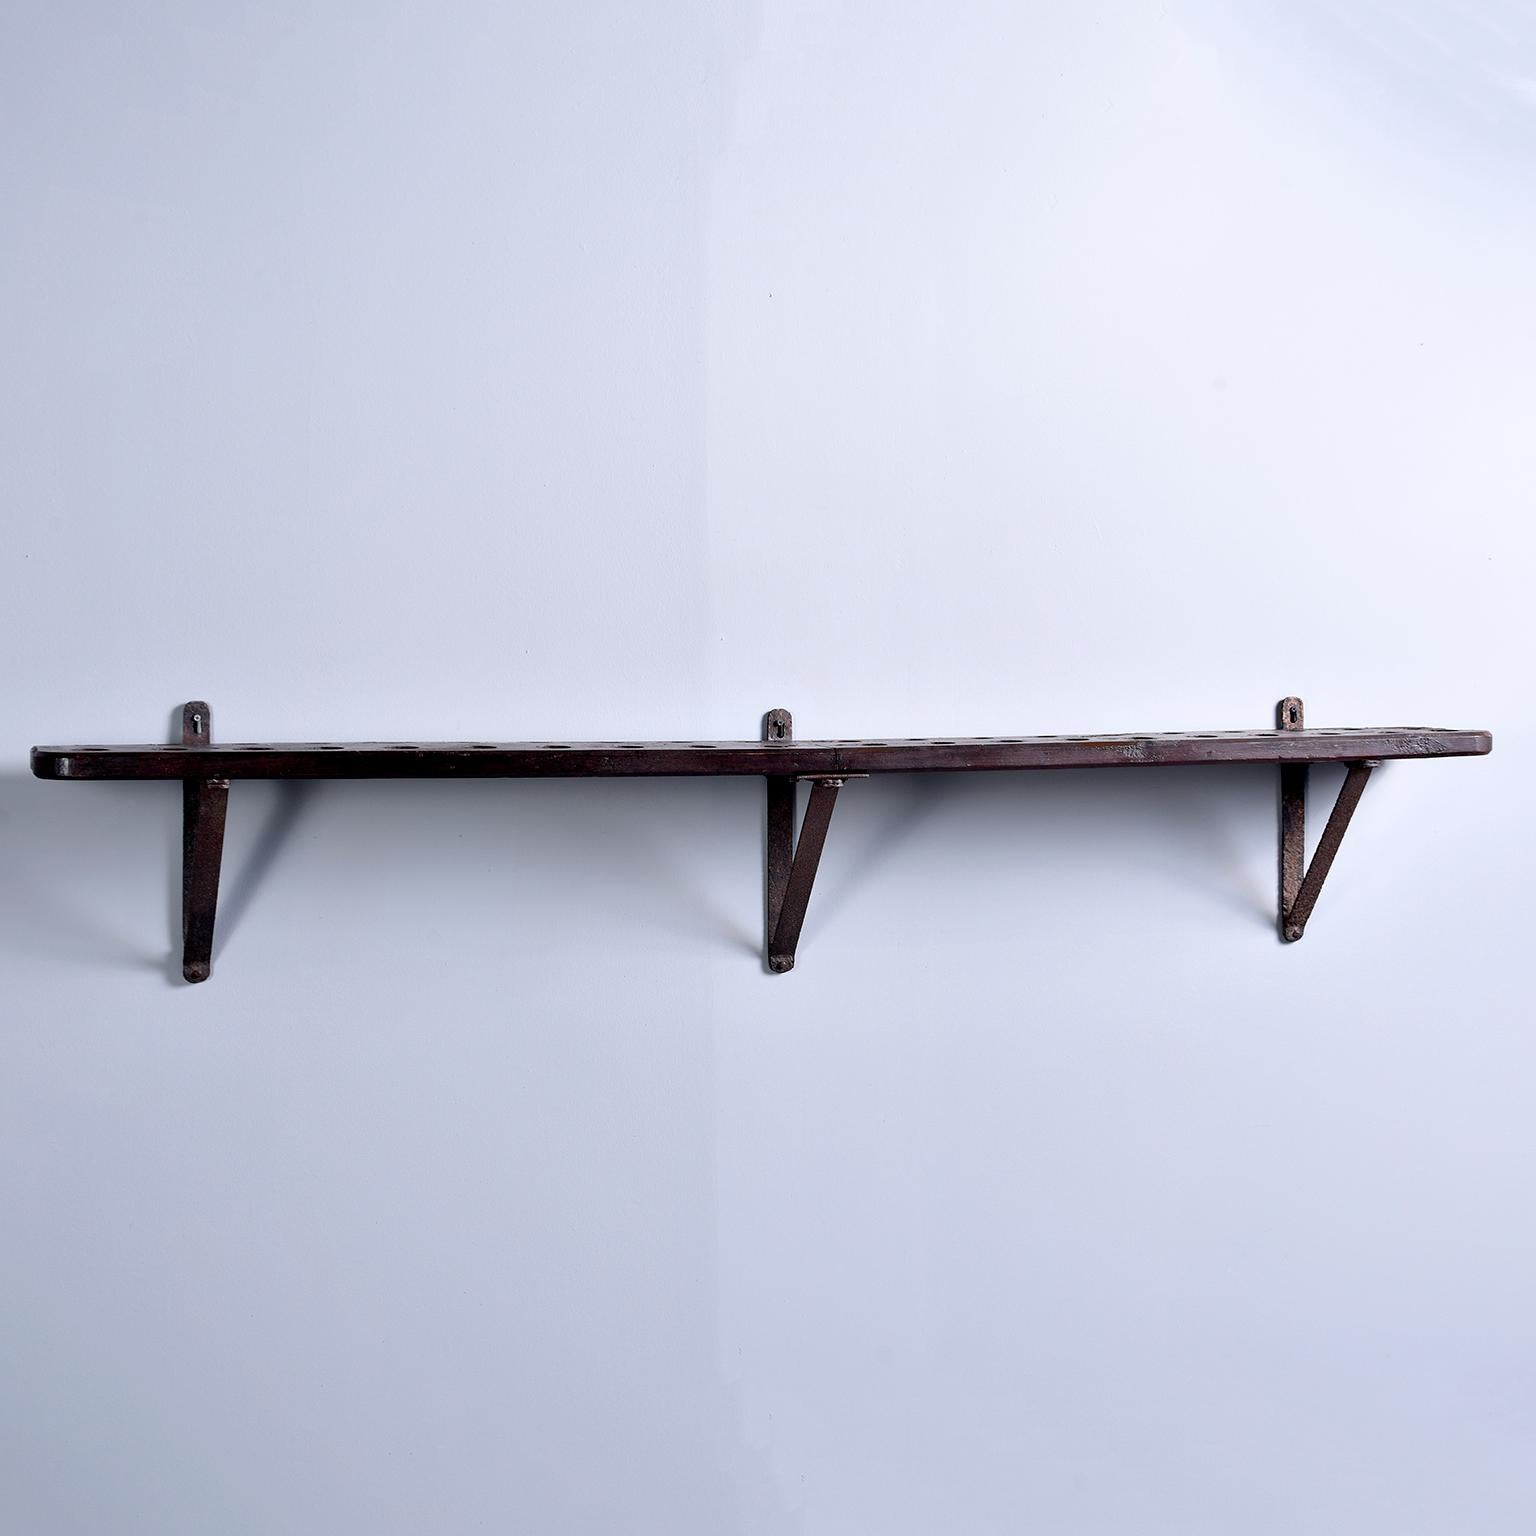 Early 20th century rustic French shelf-style wood and iron wine rack. Consists of heavy wood shelf with holes to store wine bottles upside down (keeps the cork wet) and iron supports. Great authentic piece for a home or commercial bar.